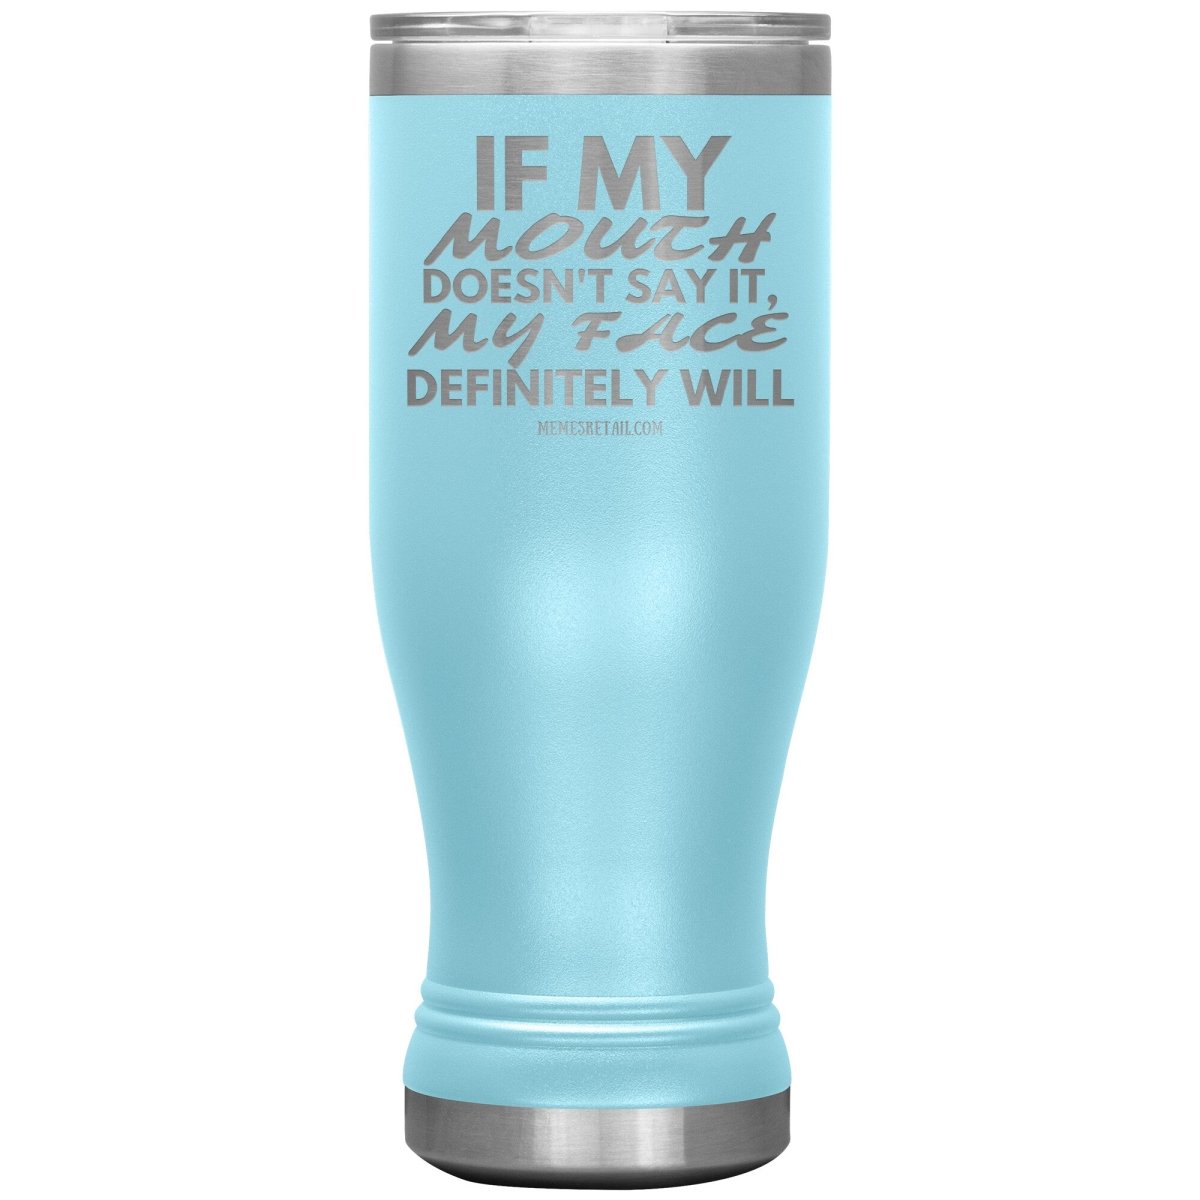 If my mouth doesn't say it, my face definitely will Tumblers, 20oz BOHO Insulated Tumbler / Light Blue - MemesRetail.com